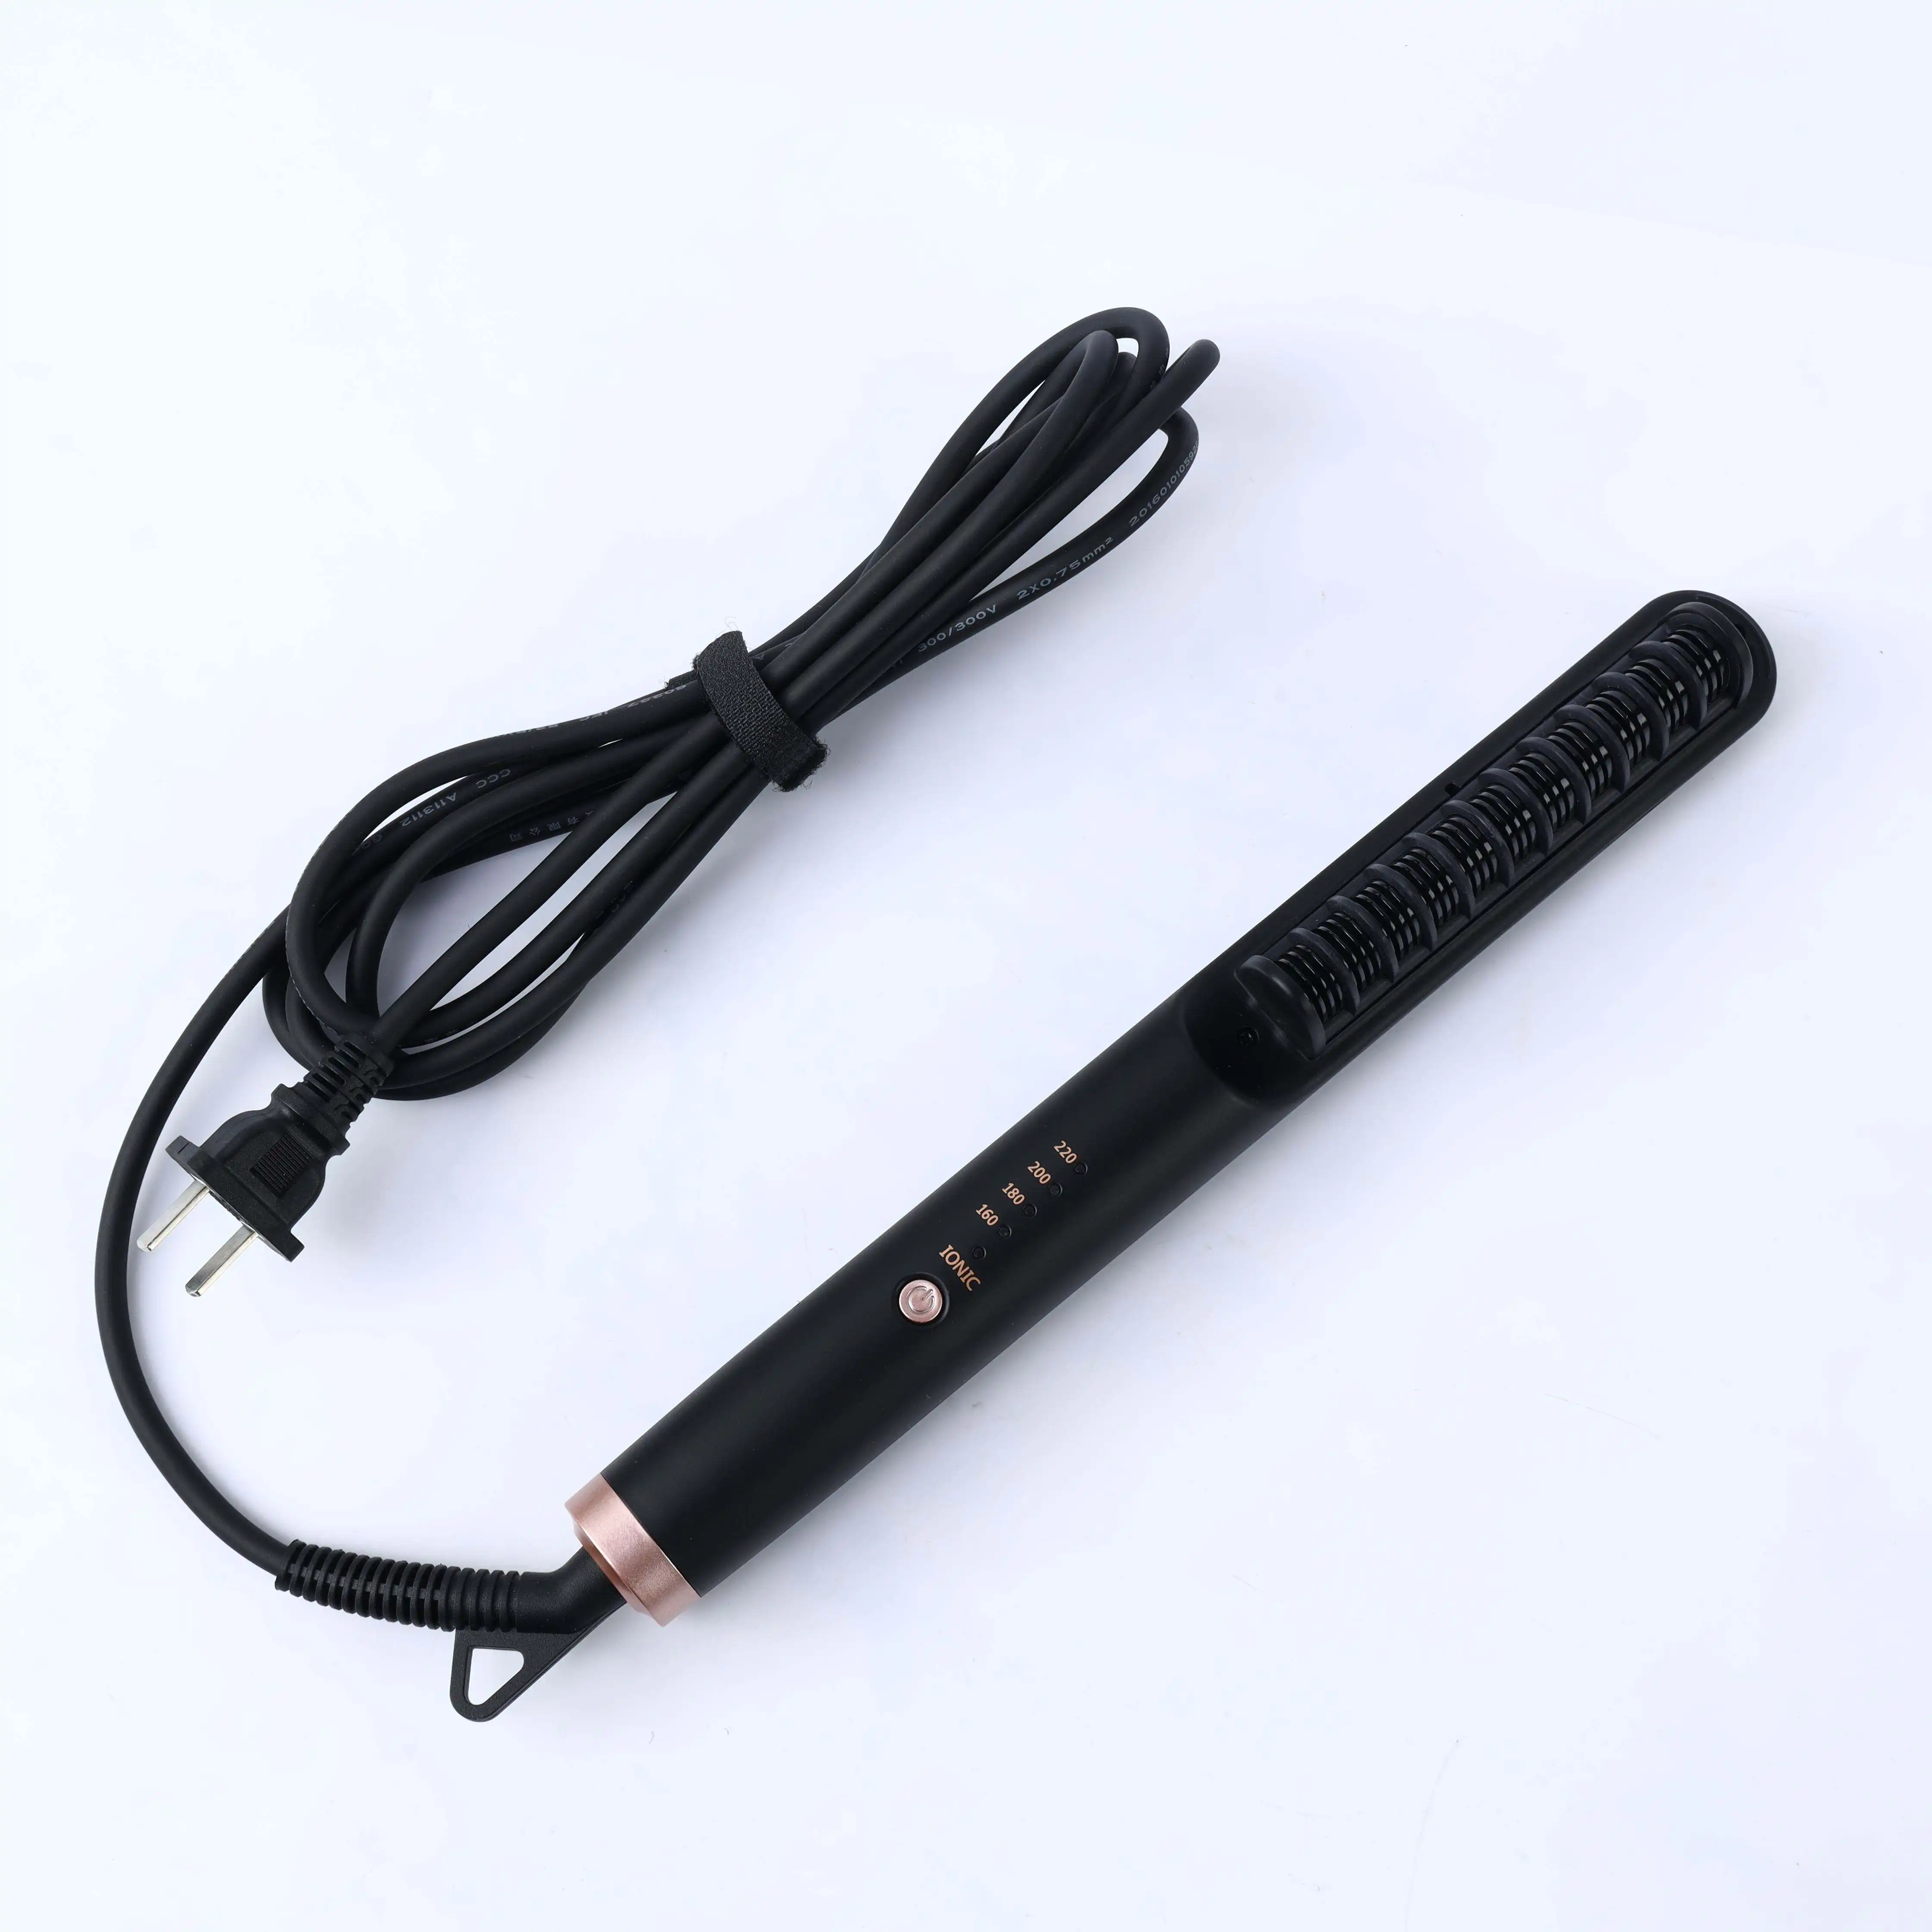 High-Performance Care And Smooth Hair Twenty Millions' Grade Negative Ions Hair Comb Curler And Straightening 2 In 1